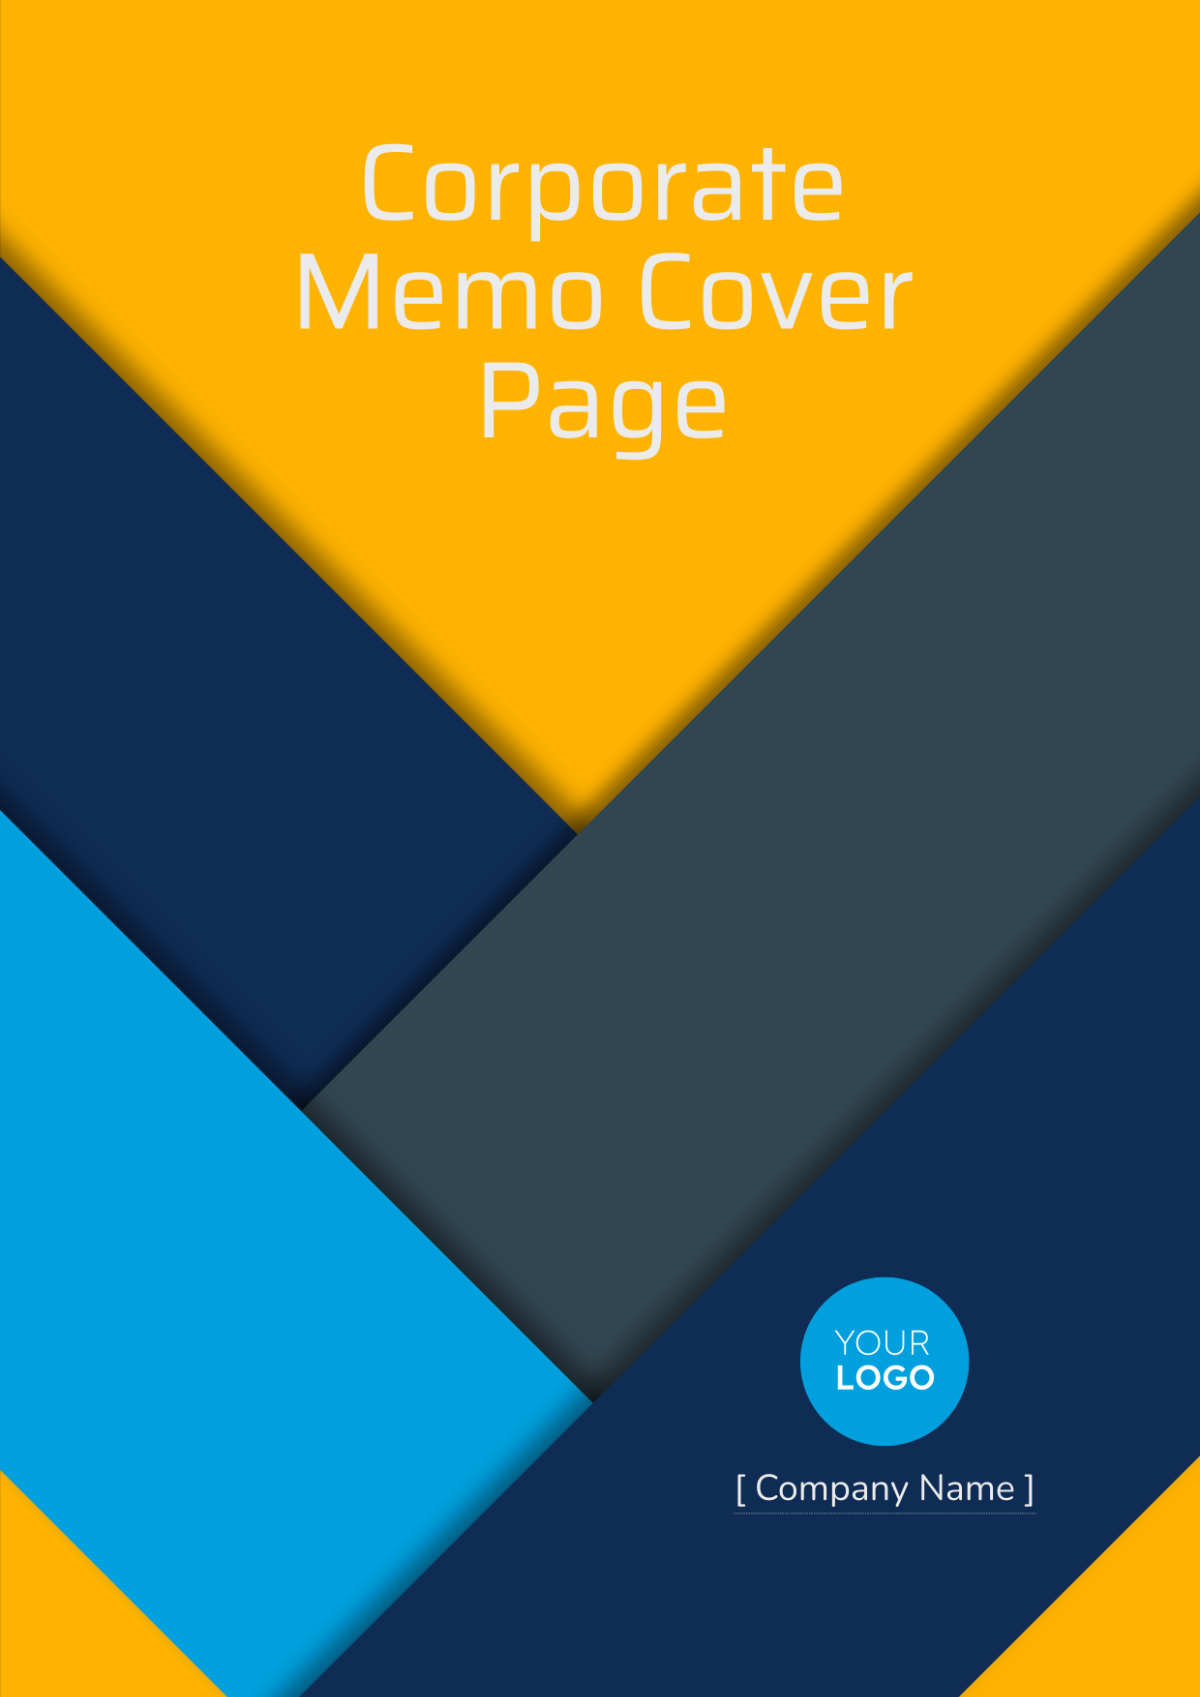 Corporate Memo Cover Page Template